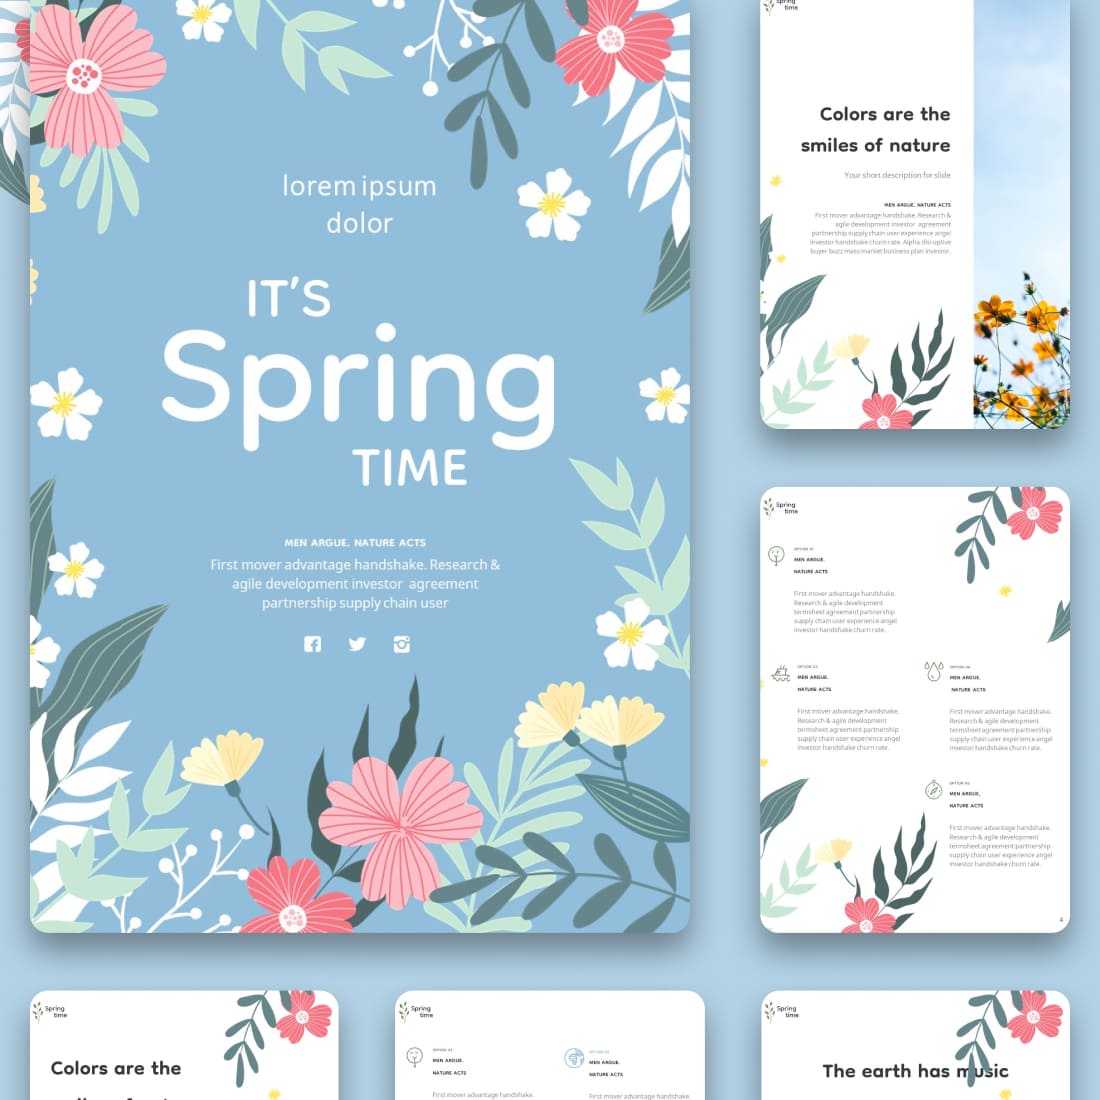 A collection of images of amazing presentation slides on the theme of spring.